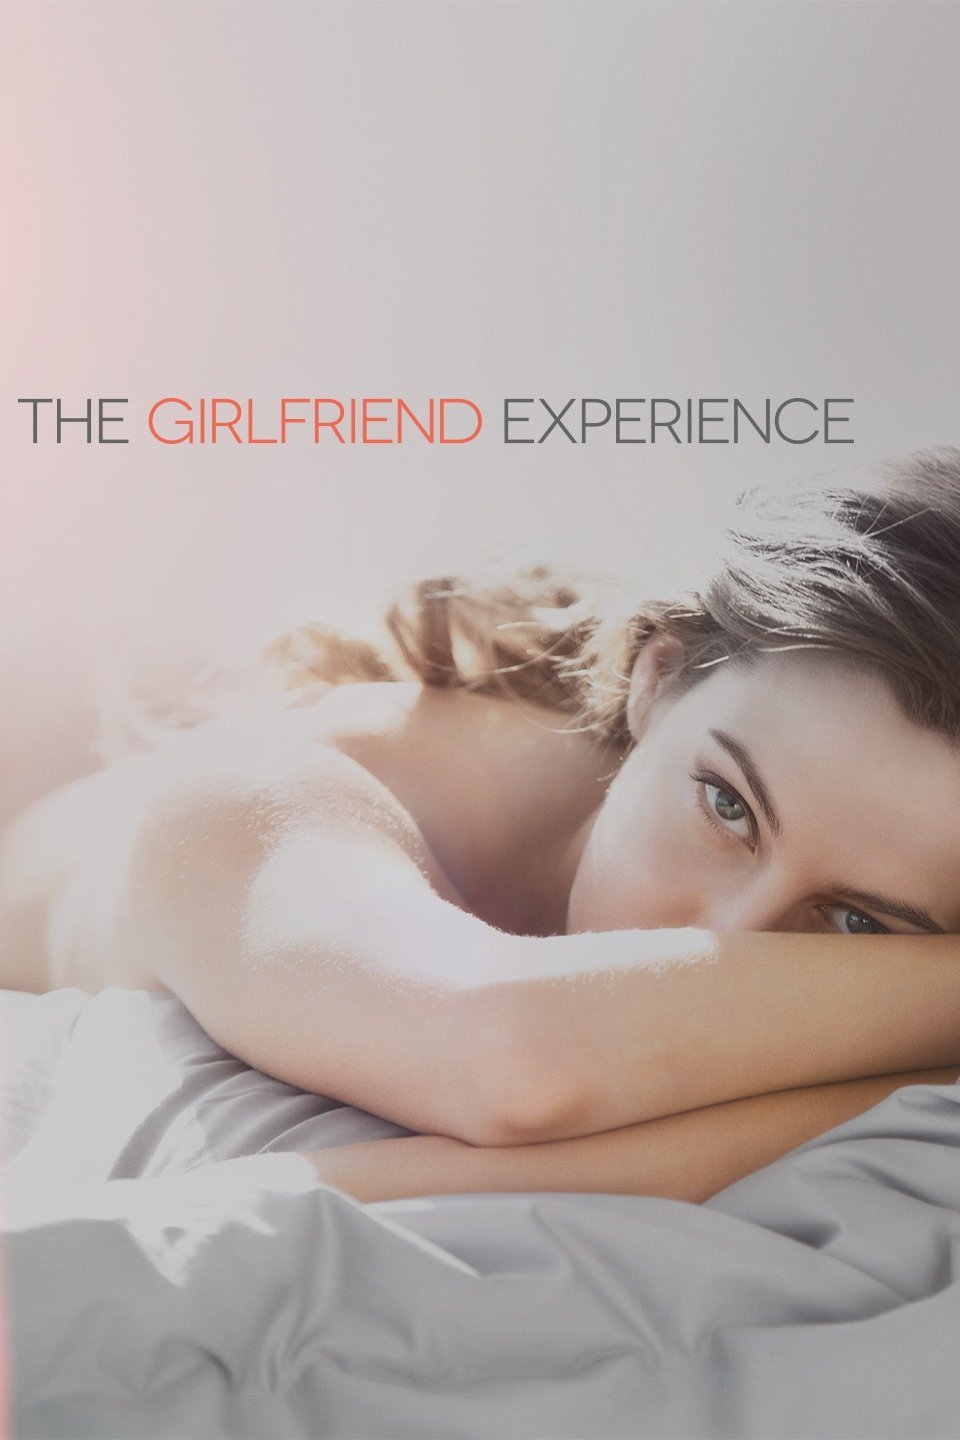 erotic girls giving the girlfriend experience